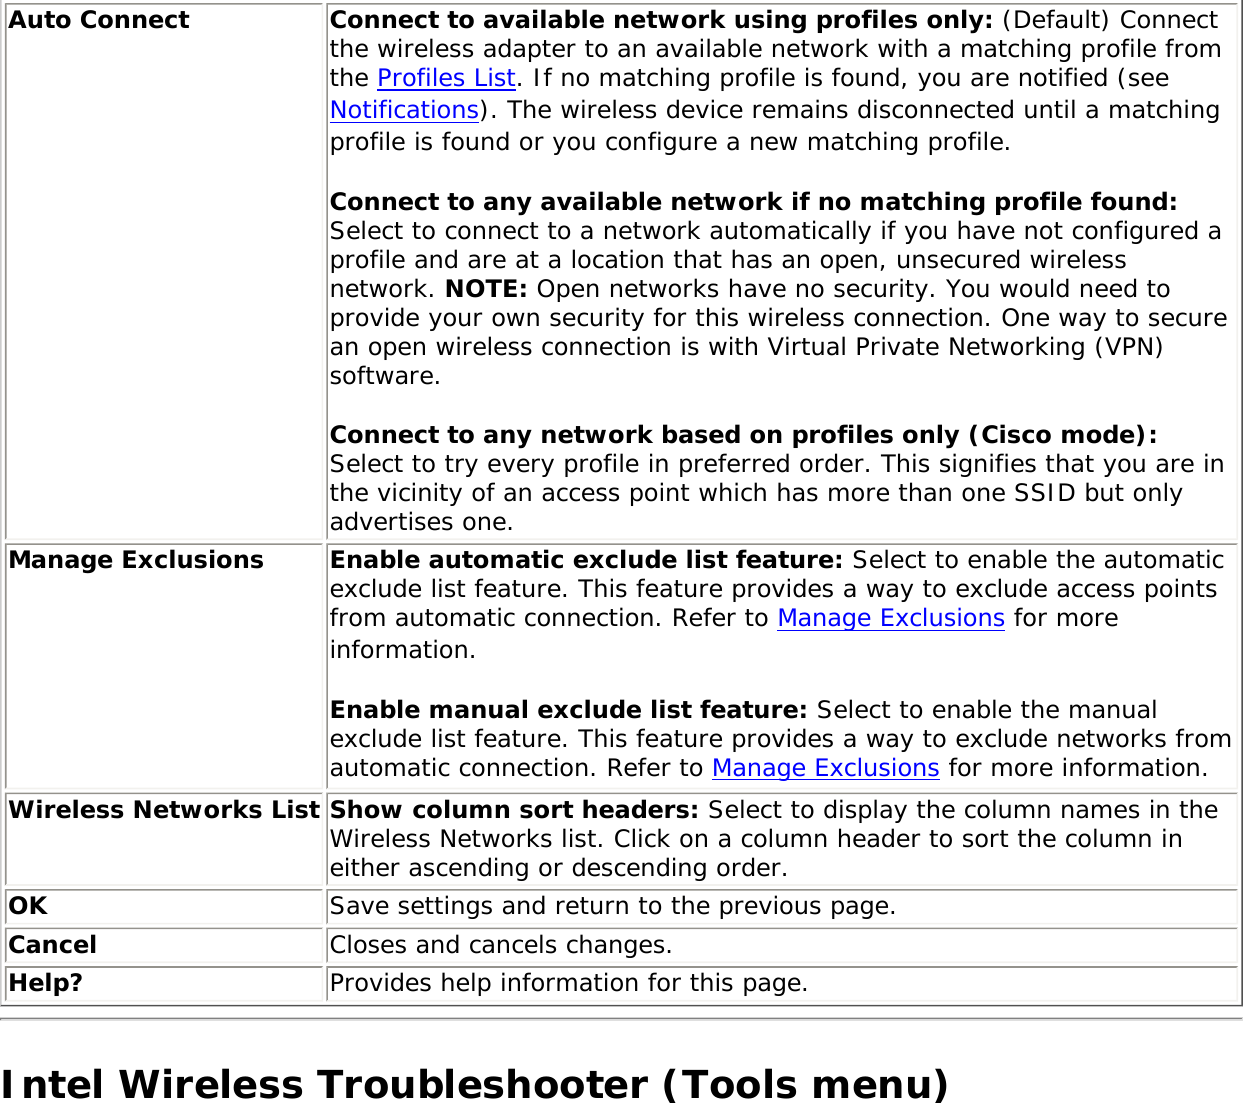 Auto Connect Connect to available network using profiles only: (Default) Connect the wireless adapter to an available network with a matching profile from the Profiles List. If no matching profile is found, you are notified (see Notifications). The wireless device remains disconnected until a matching profile is found or you configure a new matching profile. Connect to any available network if no matching profile found: Select to connect to a network automatically if you have not configured a profile and are at a location that has an open, unsecured wireless network. NOTE: Open networks have no security. You would need to provide your own security for this wireless connection. One way to secure an open wireless connection is with Virtual Private Networking (VPN) software. Connect to any network based on profiles only (Cisco mode): Select to try every profile in preferred order. This signifies that you are in the vicinity of an access point which has more than one SSID but only advertises one. Manage Exclusions Enable automatic exclude list feature: Select to enable the automatic exclude list feature. This feature provides a way to exclude access points from automatic connection. Refer to Manage Exclusions for more information. Enable manual exclude list feature: Select to enable the manual exclude list feature. This feature provides a way to exclude networks from automatic connection. Refer to Manage Exclusions for more information.Wireless Networks List Show column sort headers: Select to display the column names in the Wireless Networks list. Click on a column header to sort the column in either ascending or descending order. OK Save settings and return to the previous page.Cancel Closes and cancels changes.Help? Provides help information for this page.Intel Wireless Troubleshooter (Tools menu)